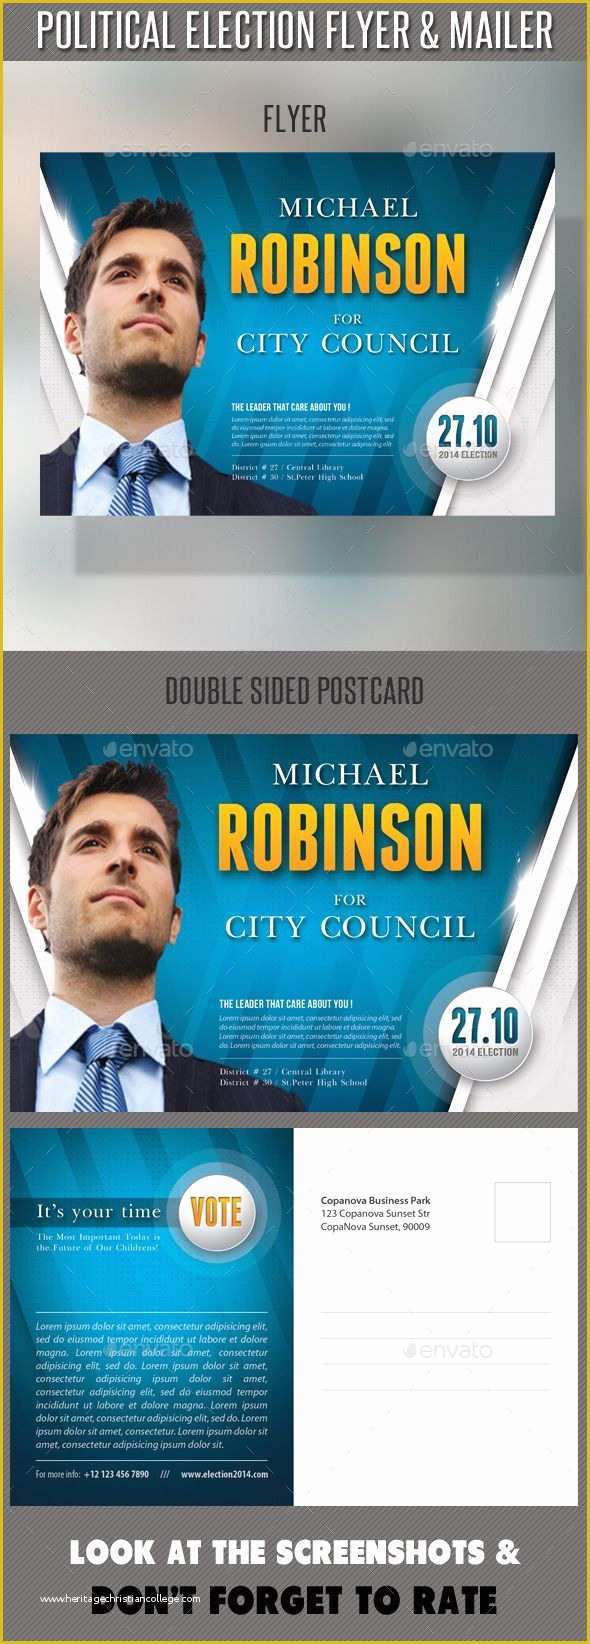 Political Campaign Templates Free Of Political Election Flyer and Mailer Template